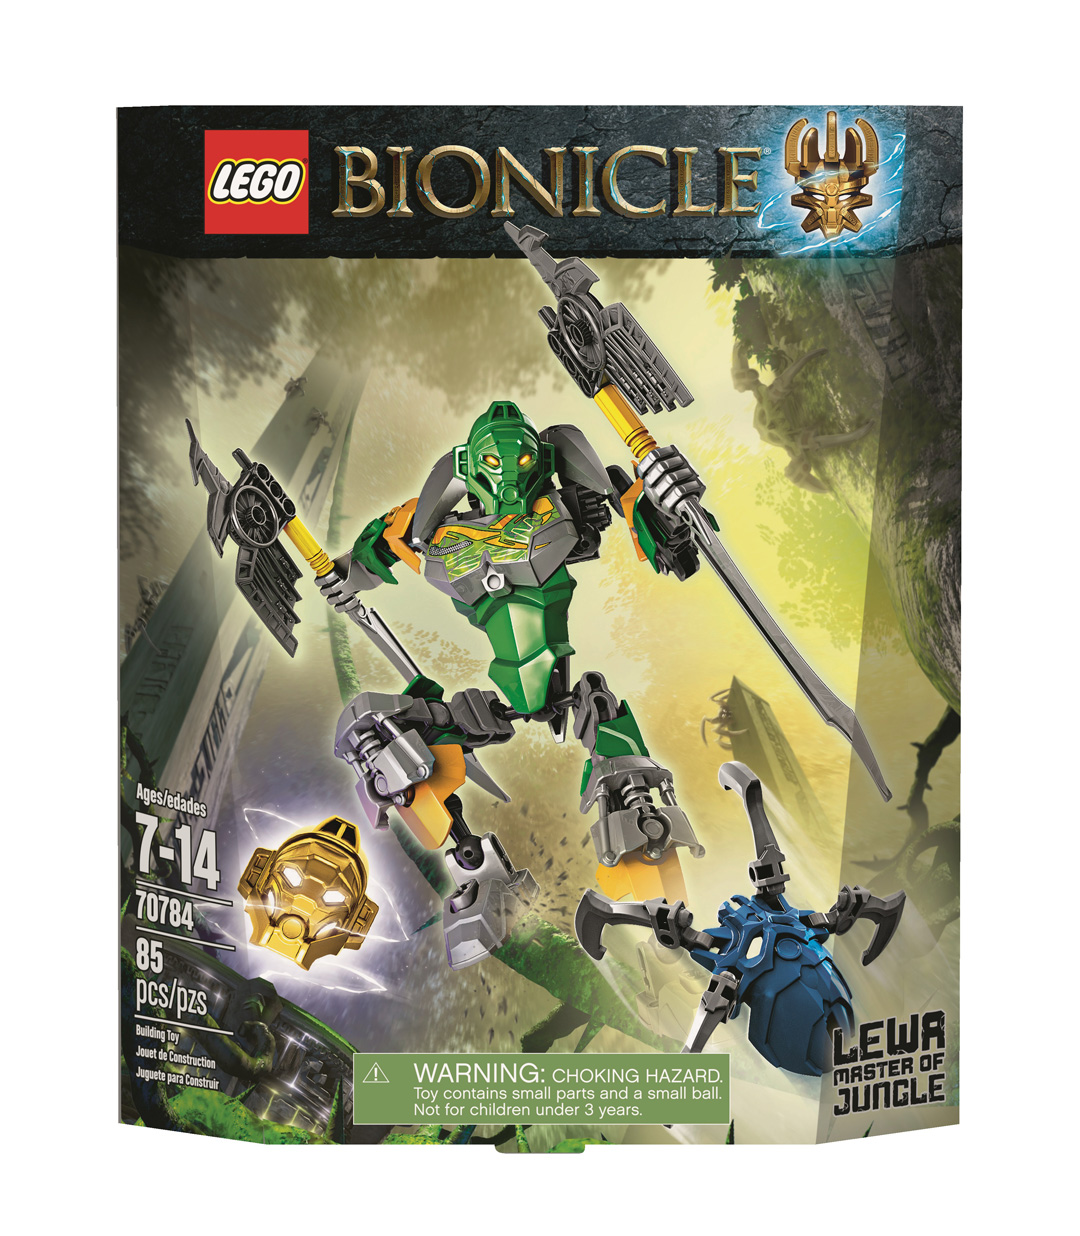 LEGO Bionicle Triumphantly Returns In January